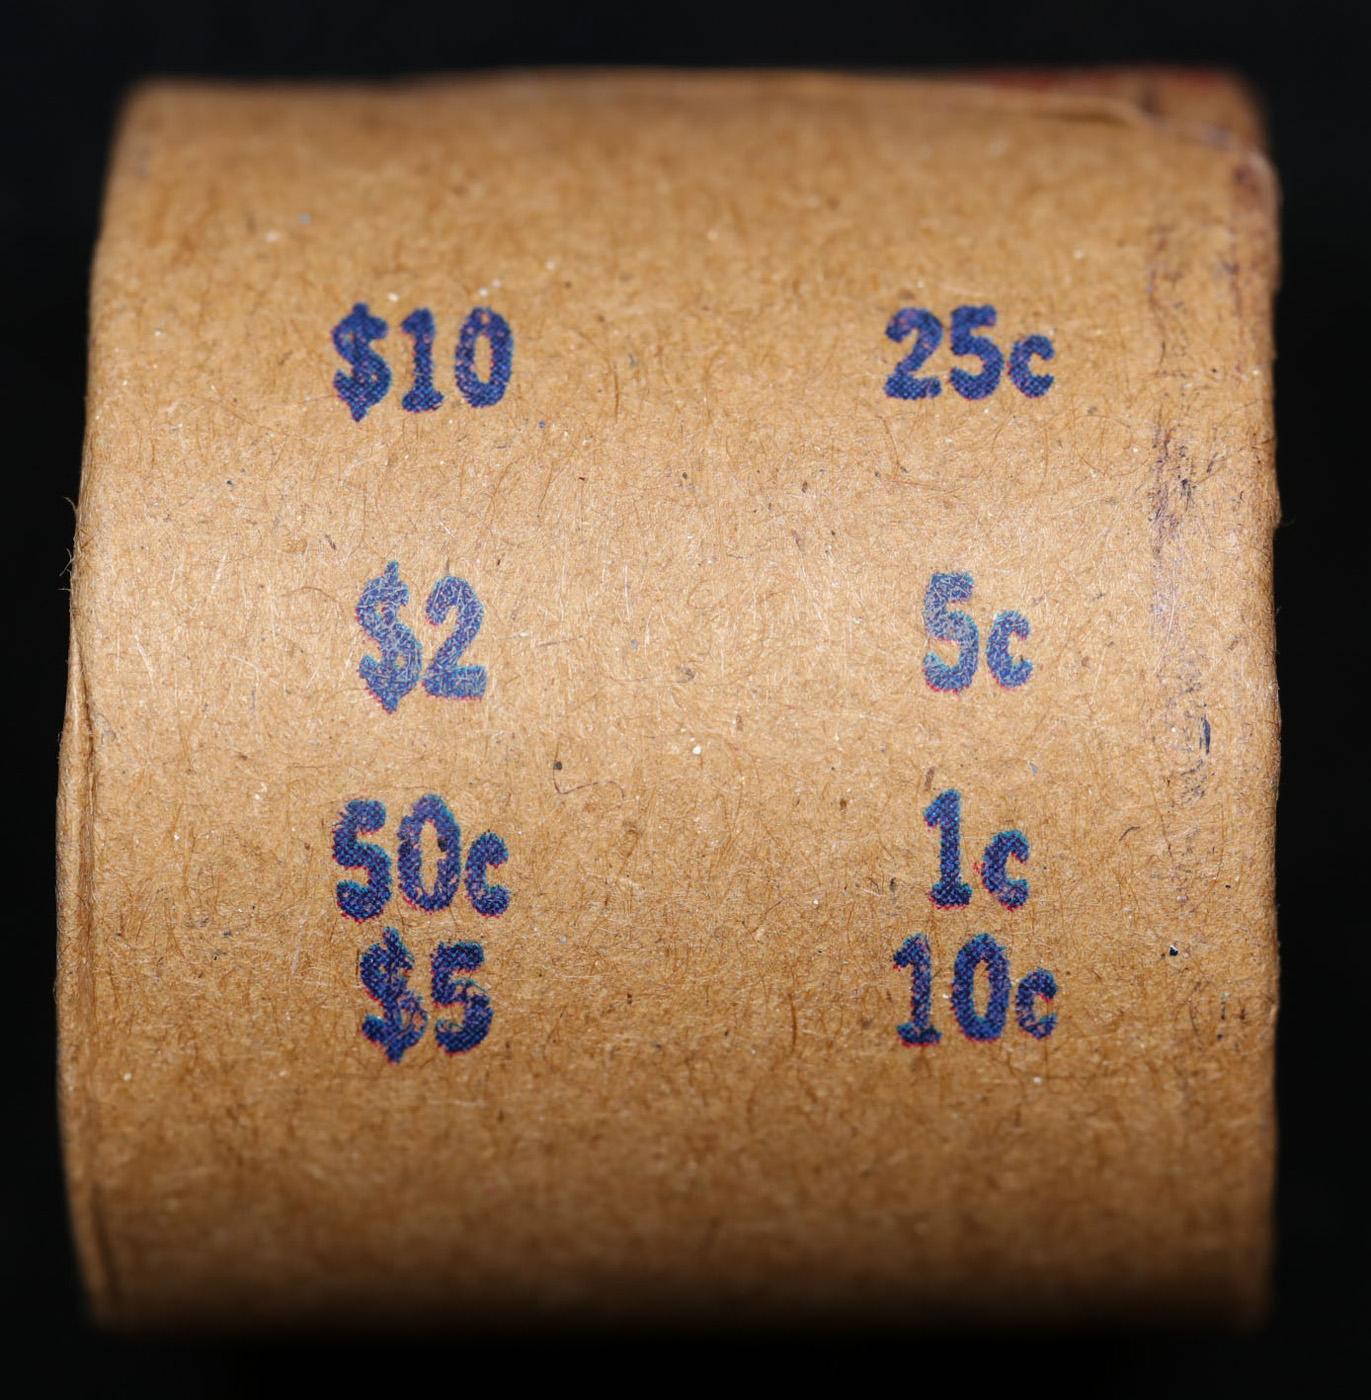 High Value! - Covered End Roll - Marked " Morgan Premium" - Weight shows x10 Coins (FC)